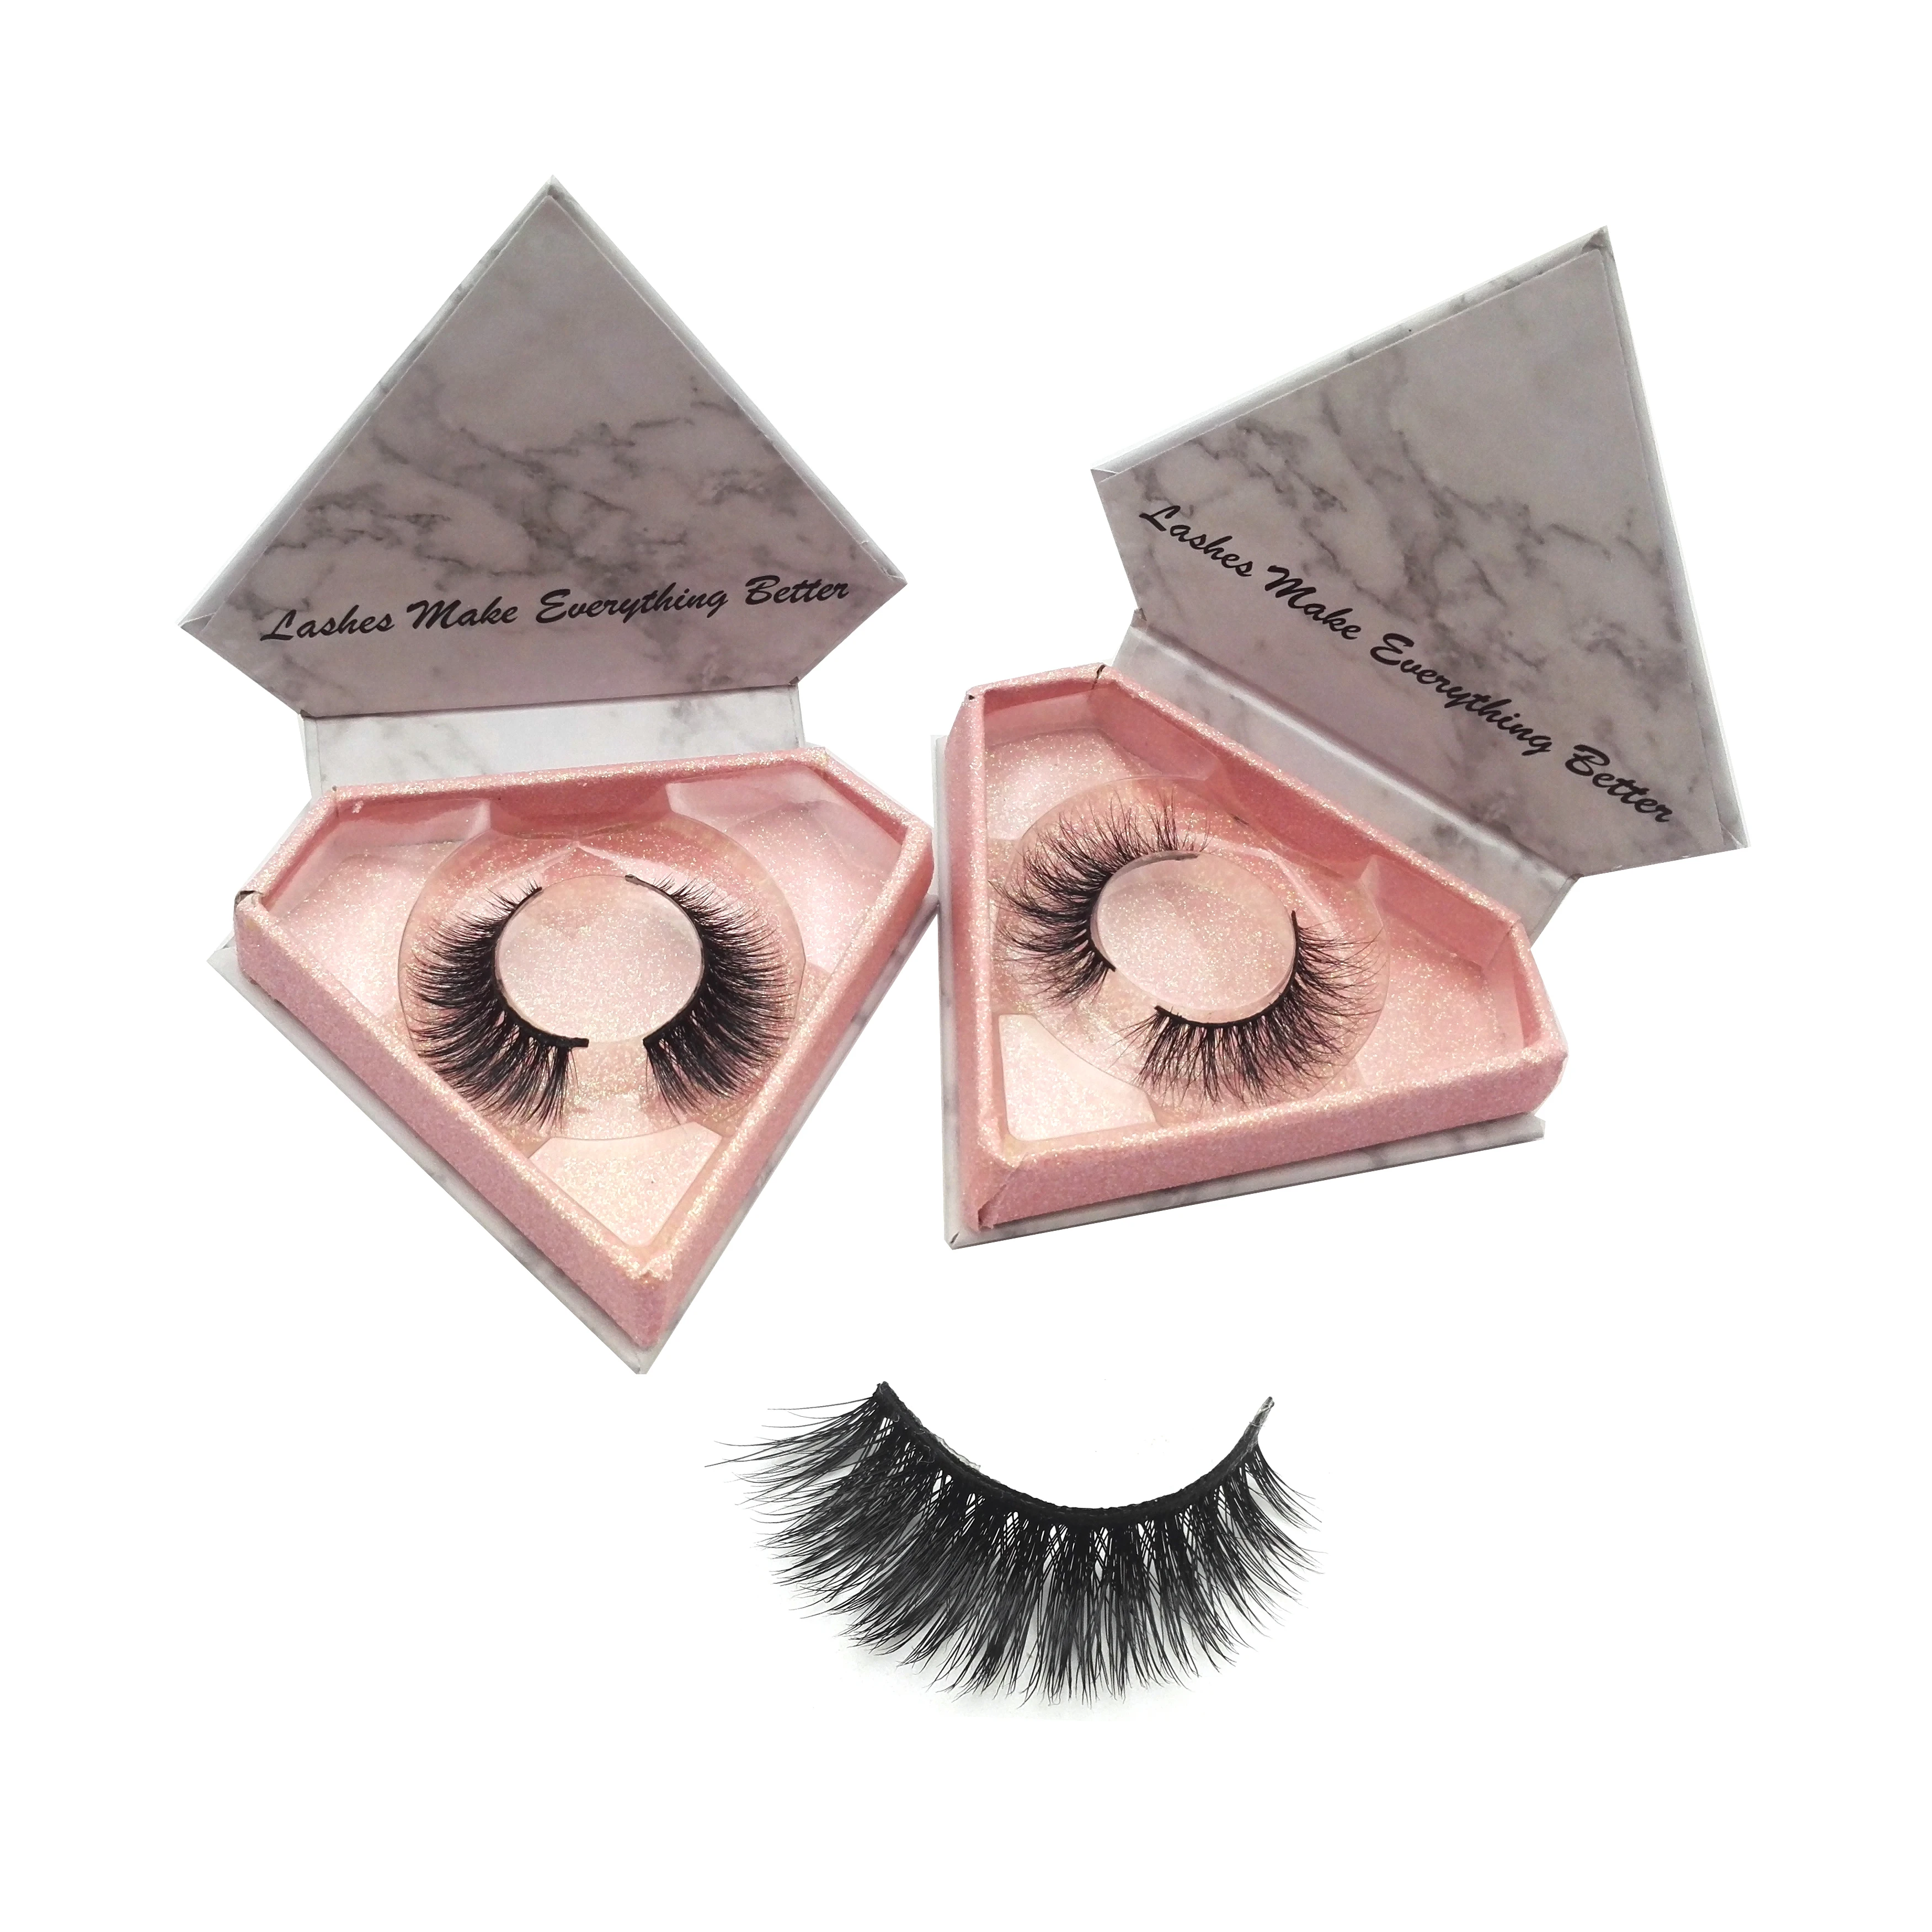 Creat Your Own Brand Eyelashes  Private Label Eyelash Packaging Cruelty Free  3d Mink Lashes 60813935520 